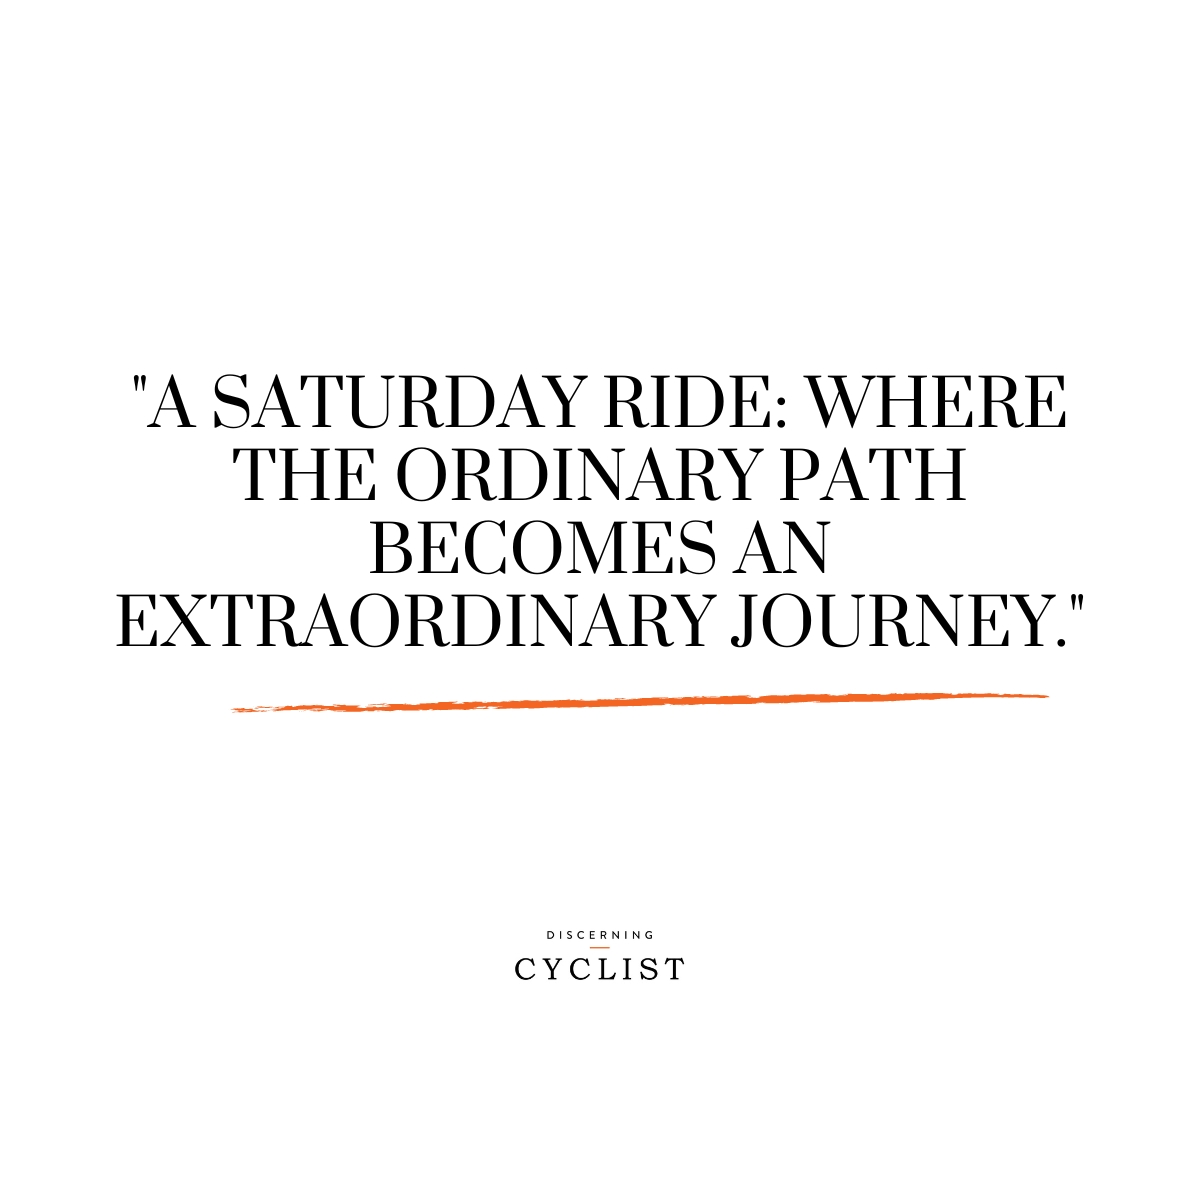 "A Saturday ride: where the ordinary path becomes an extraordinary journey."